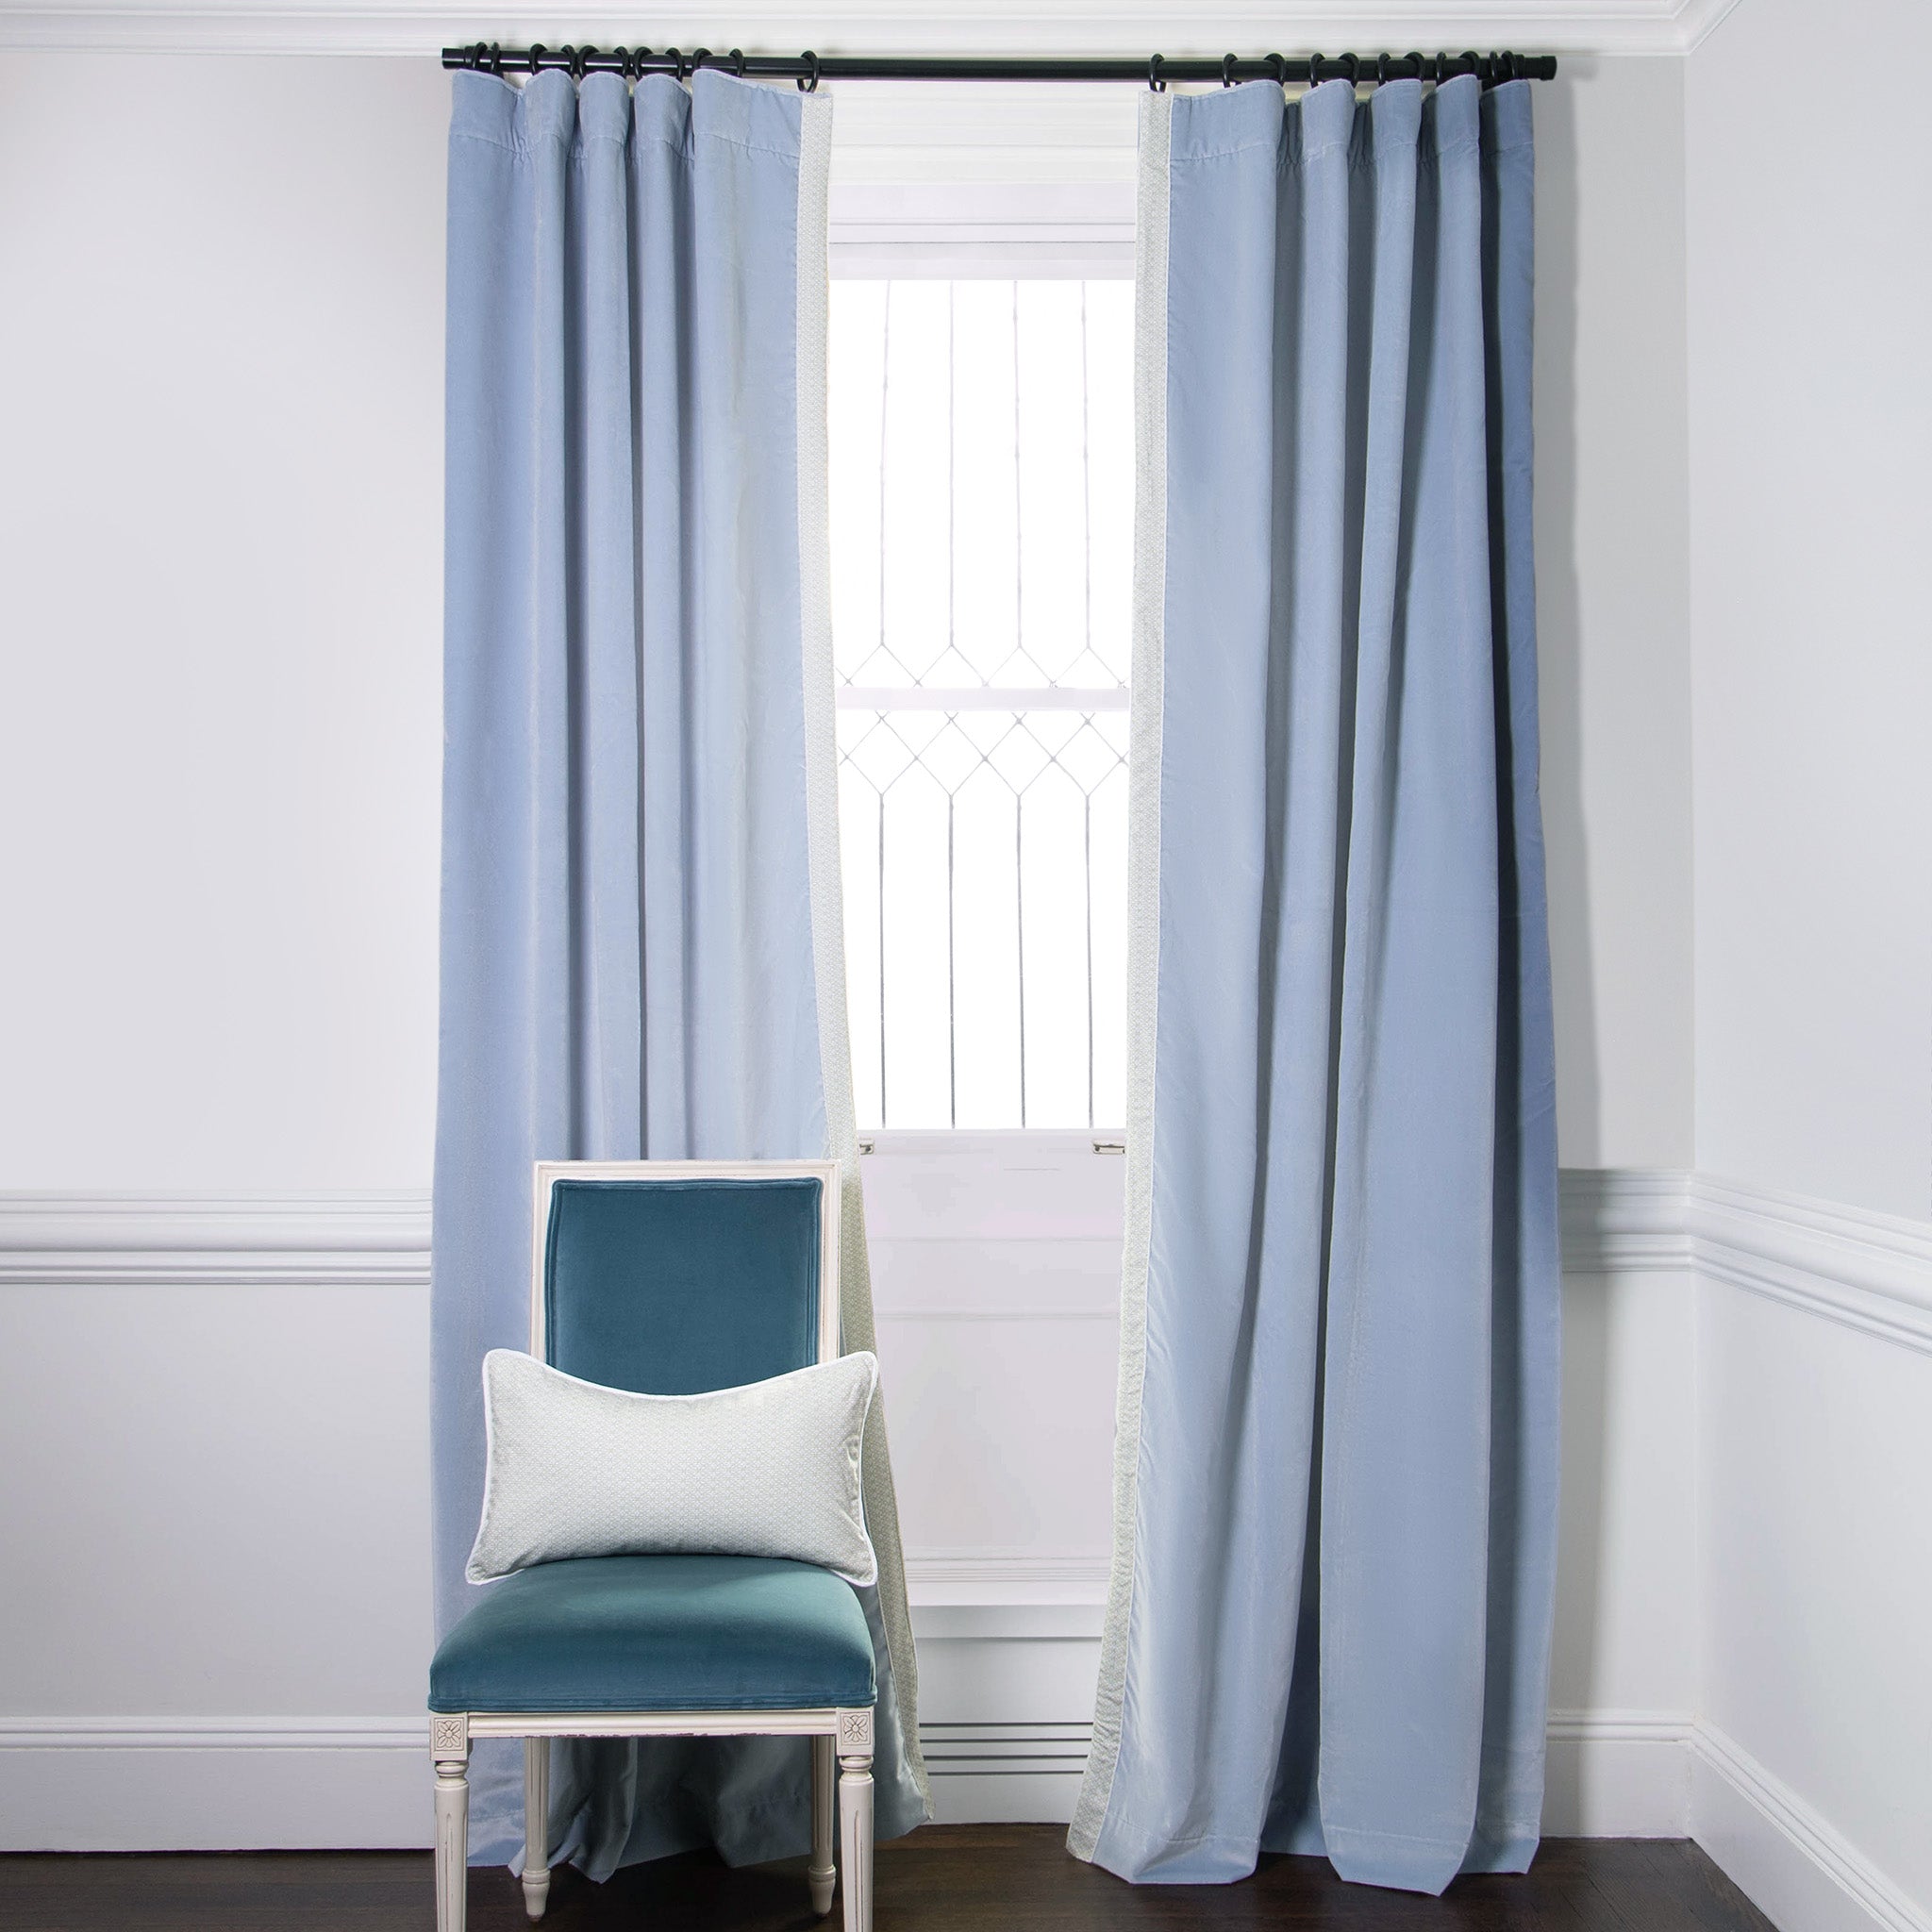 Sky Blue Velvet Curtains on black rod in front of an illuminated window with Blue Velvet chair with a Moss Green Geometric Printed lumbar on top